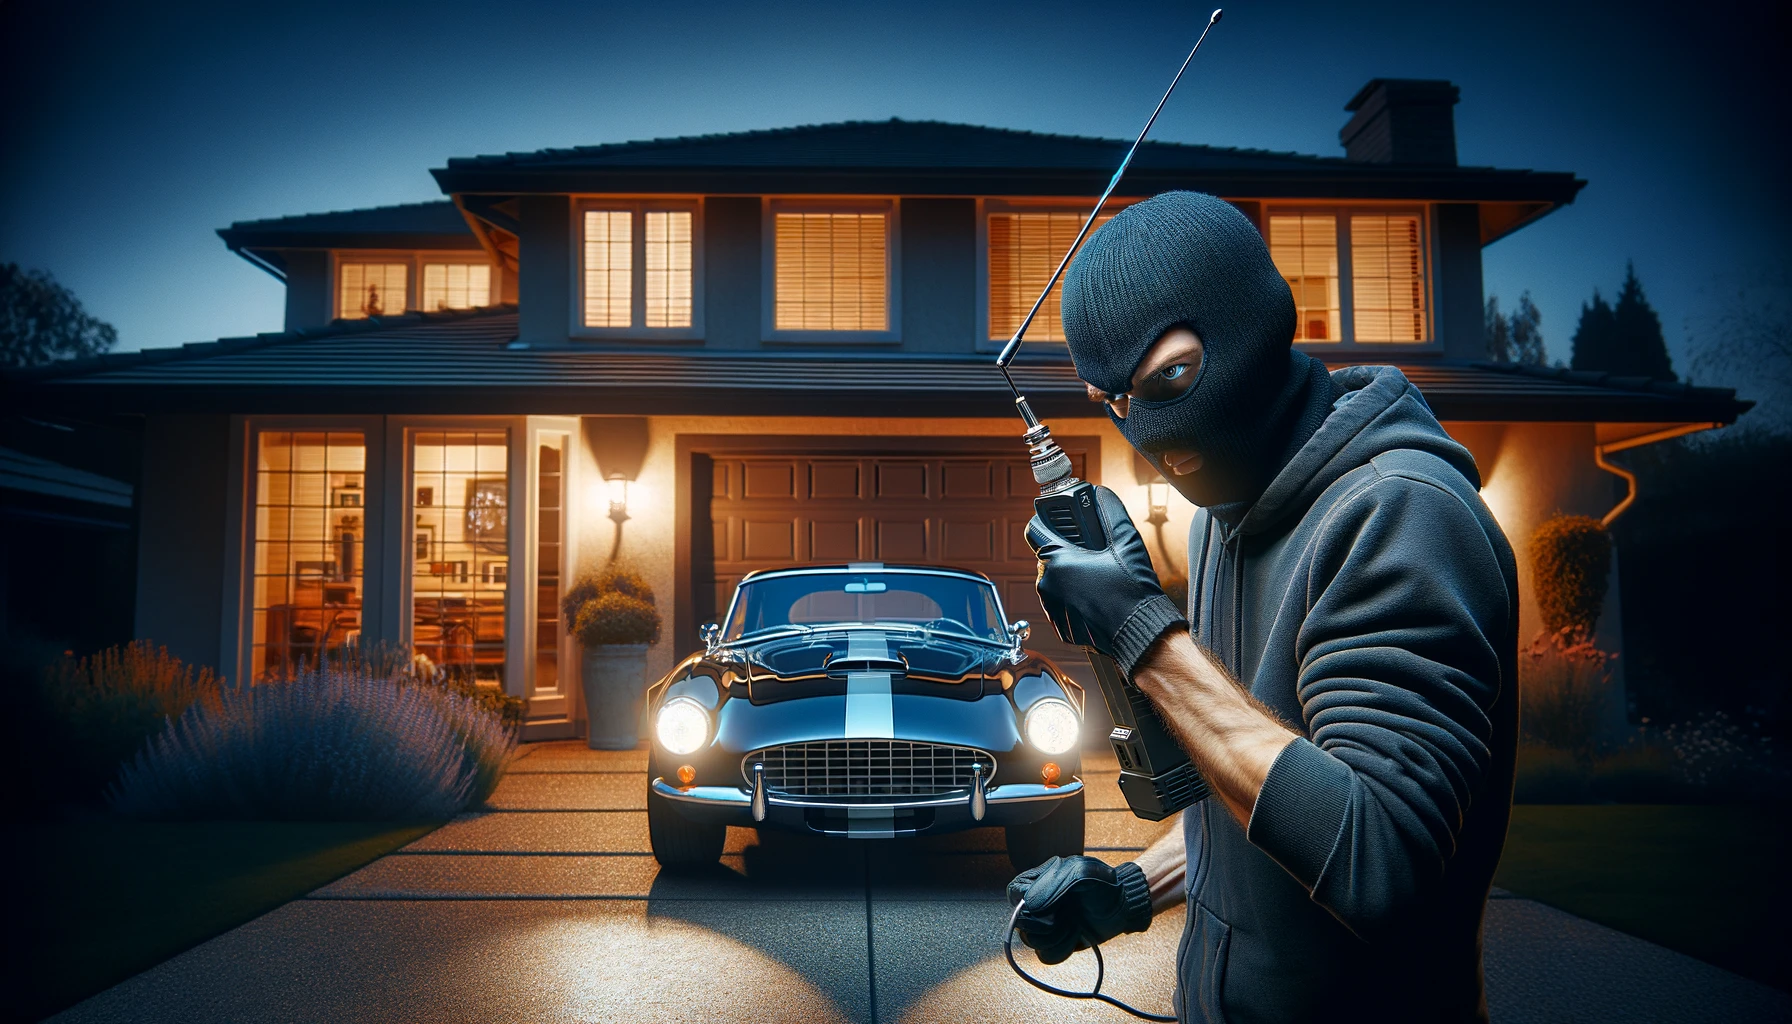 A thief using an antenna to attempt to steal a car. A signal blocking device is preventing it.